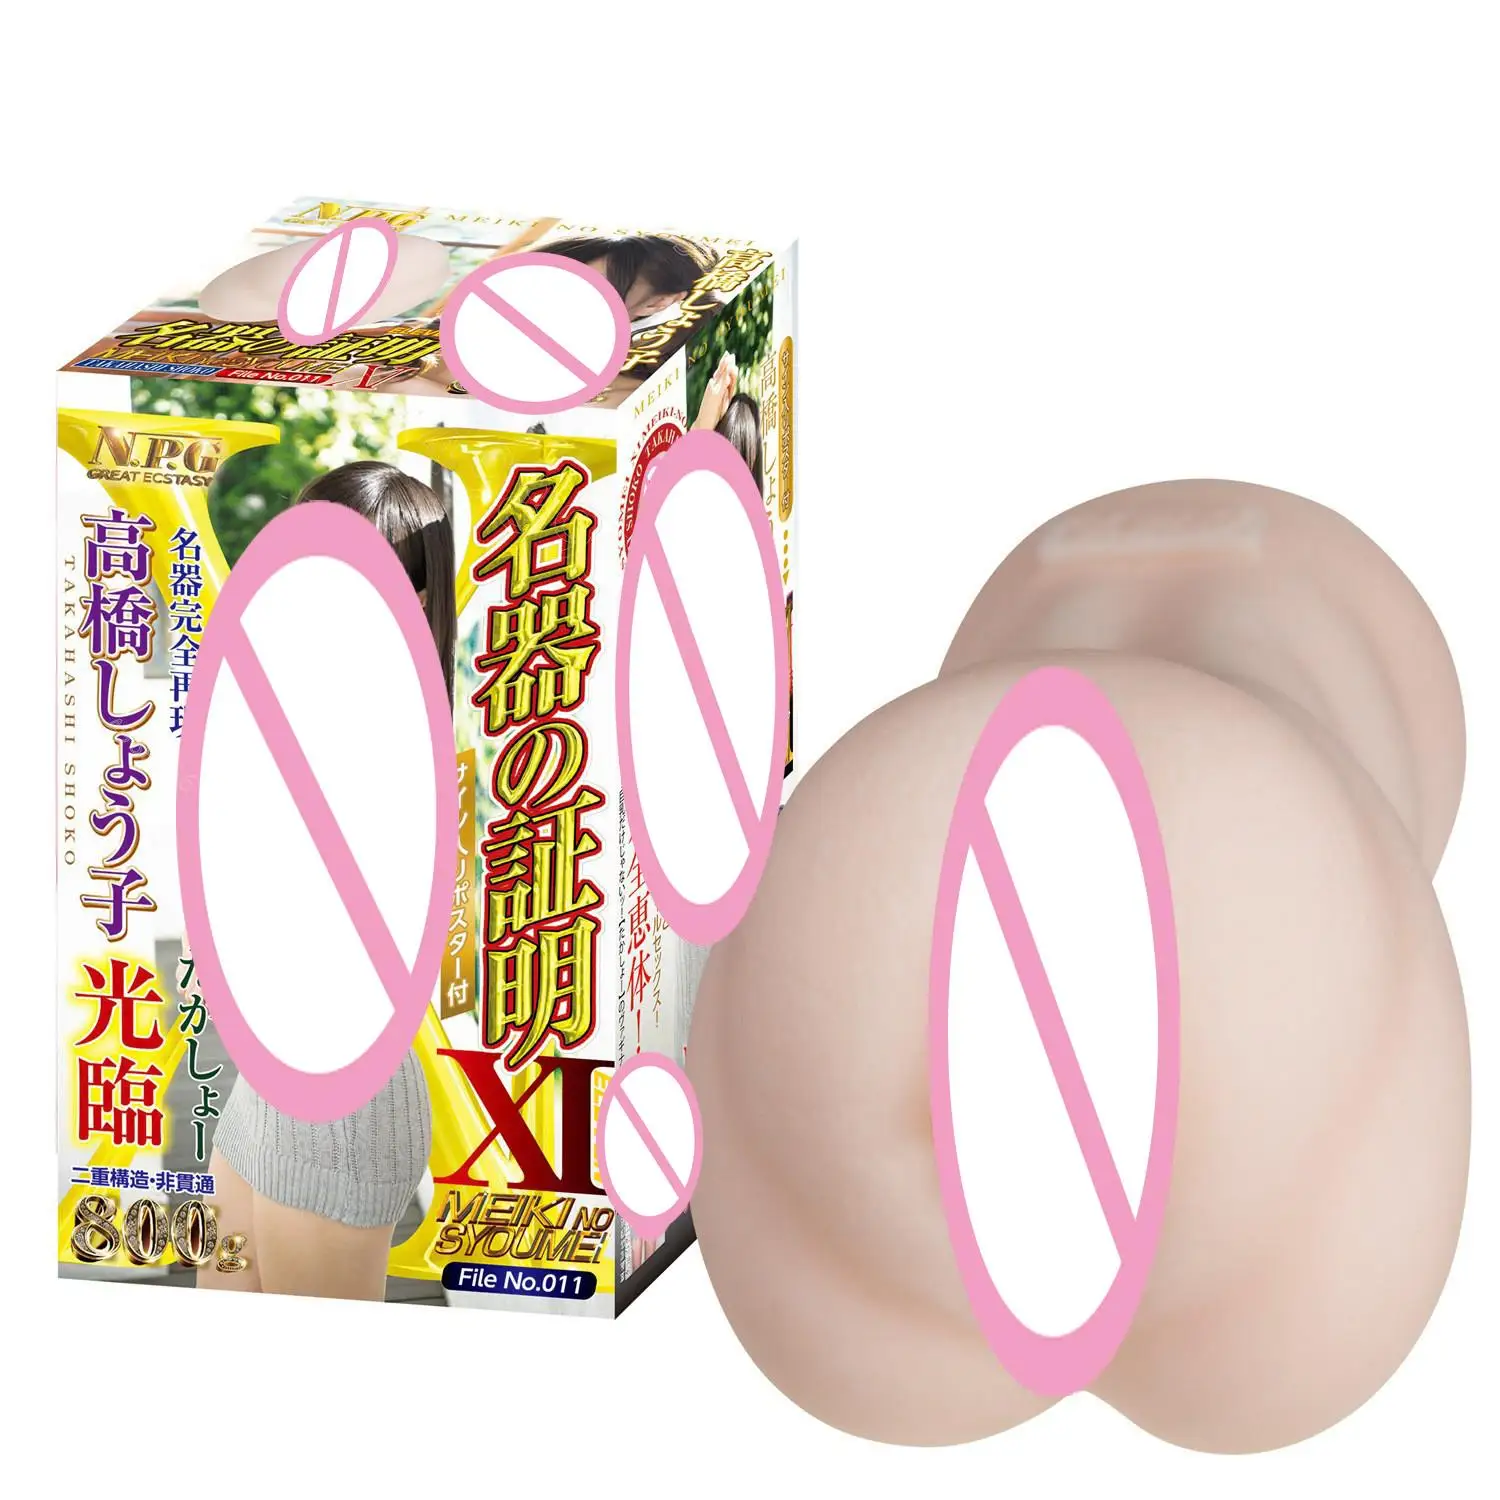 

Japan Imported NPG Realistic Pocket Pussy 18 real Male Masturbator Cup dildos No Syoumei 11 Sex Toys for Men Artificial Vagina